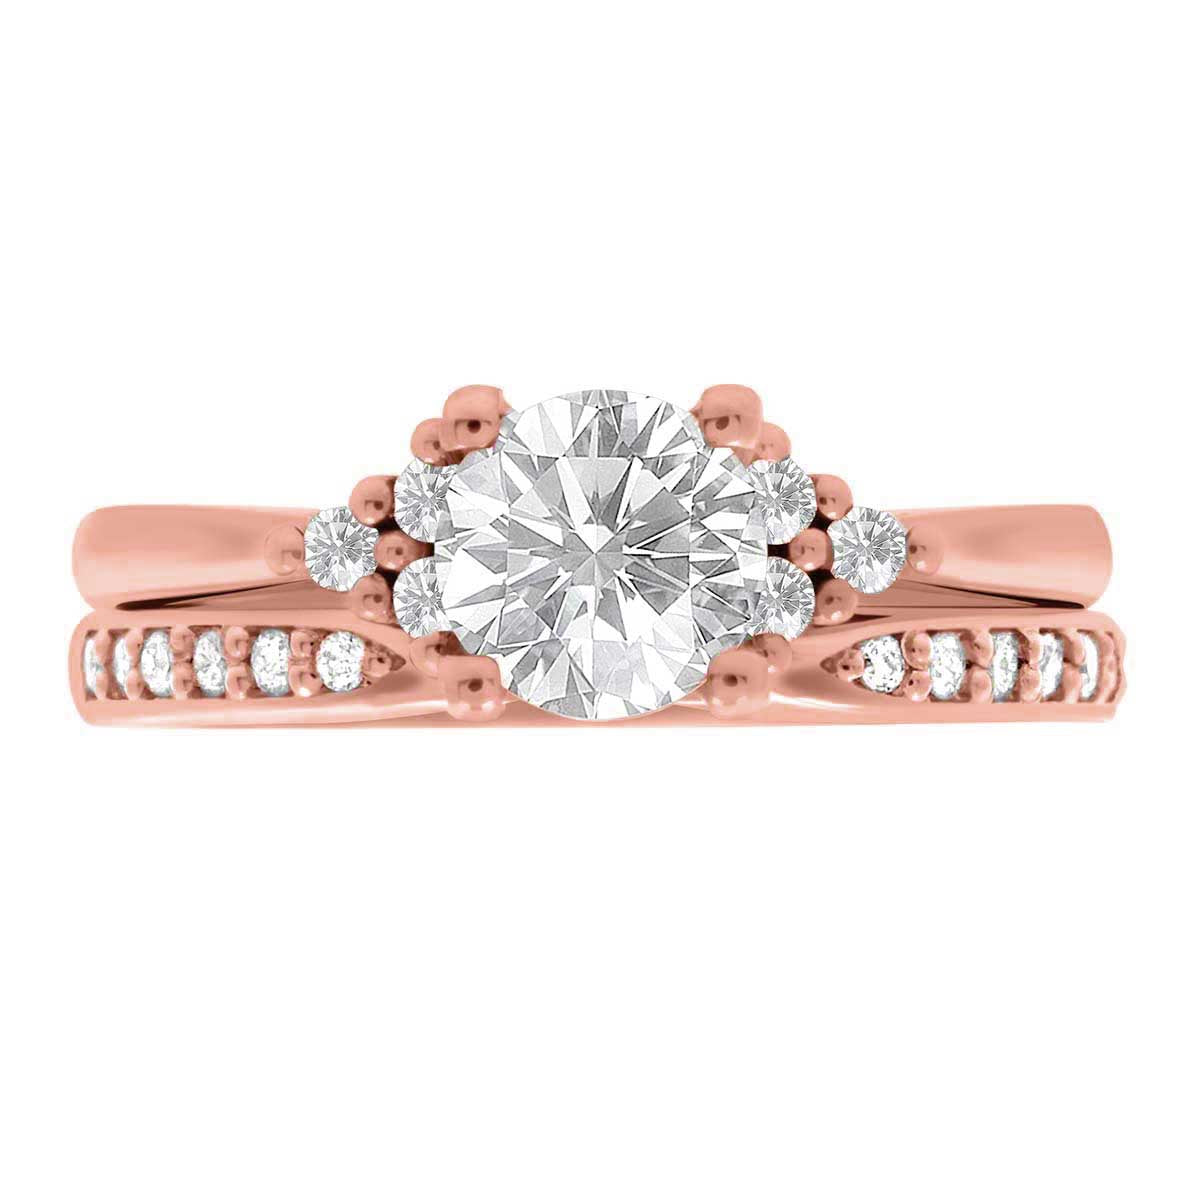 Handmade Engagement Ring in rose gold with a diamond wedding ring